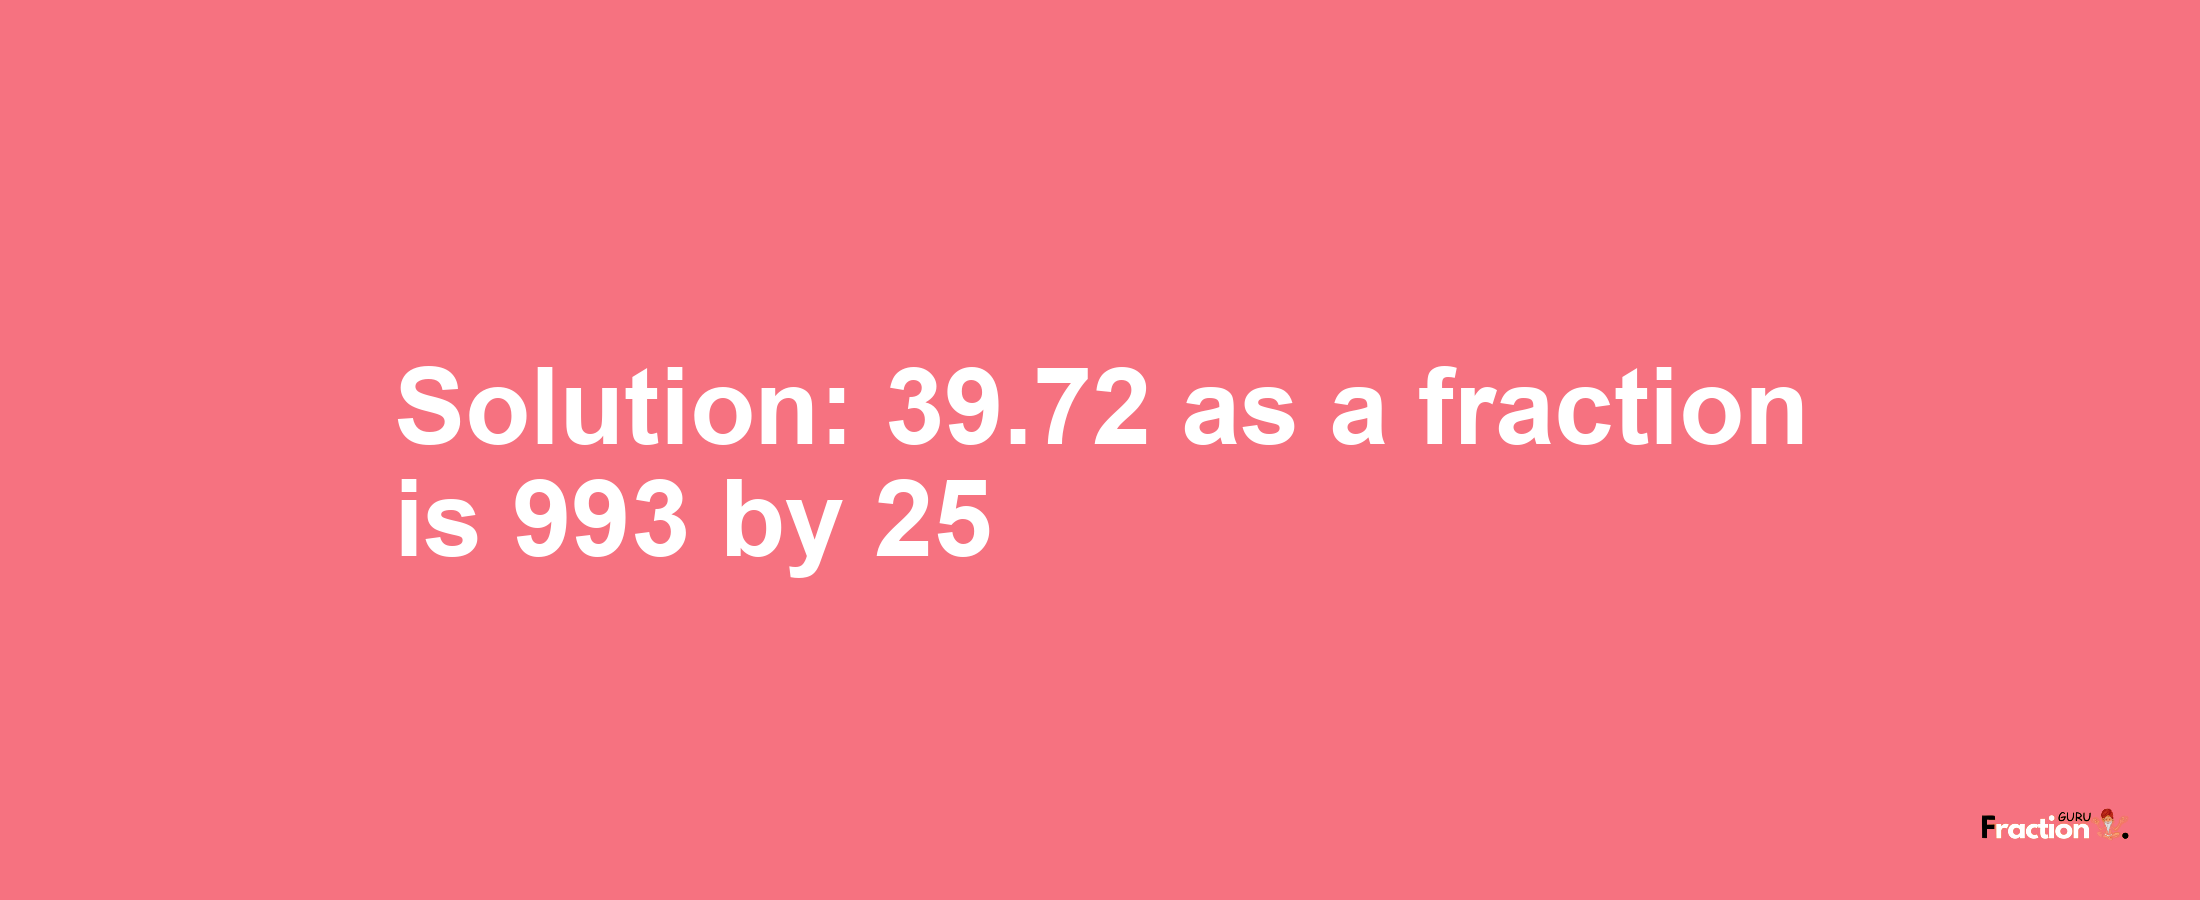 Solution:39.72 as a fraction is 993/25